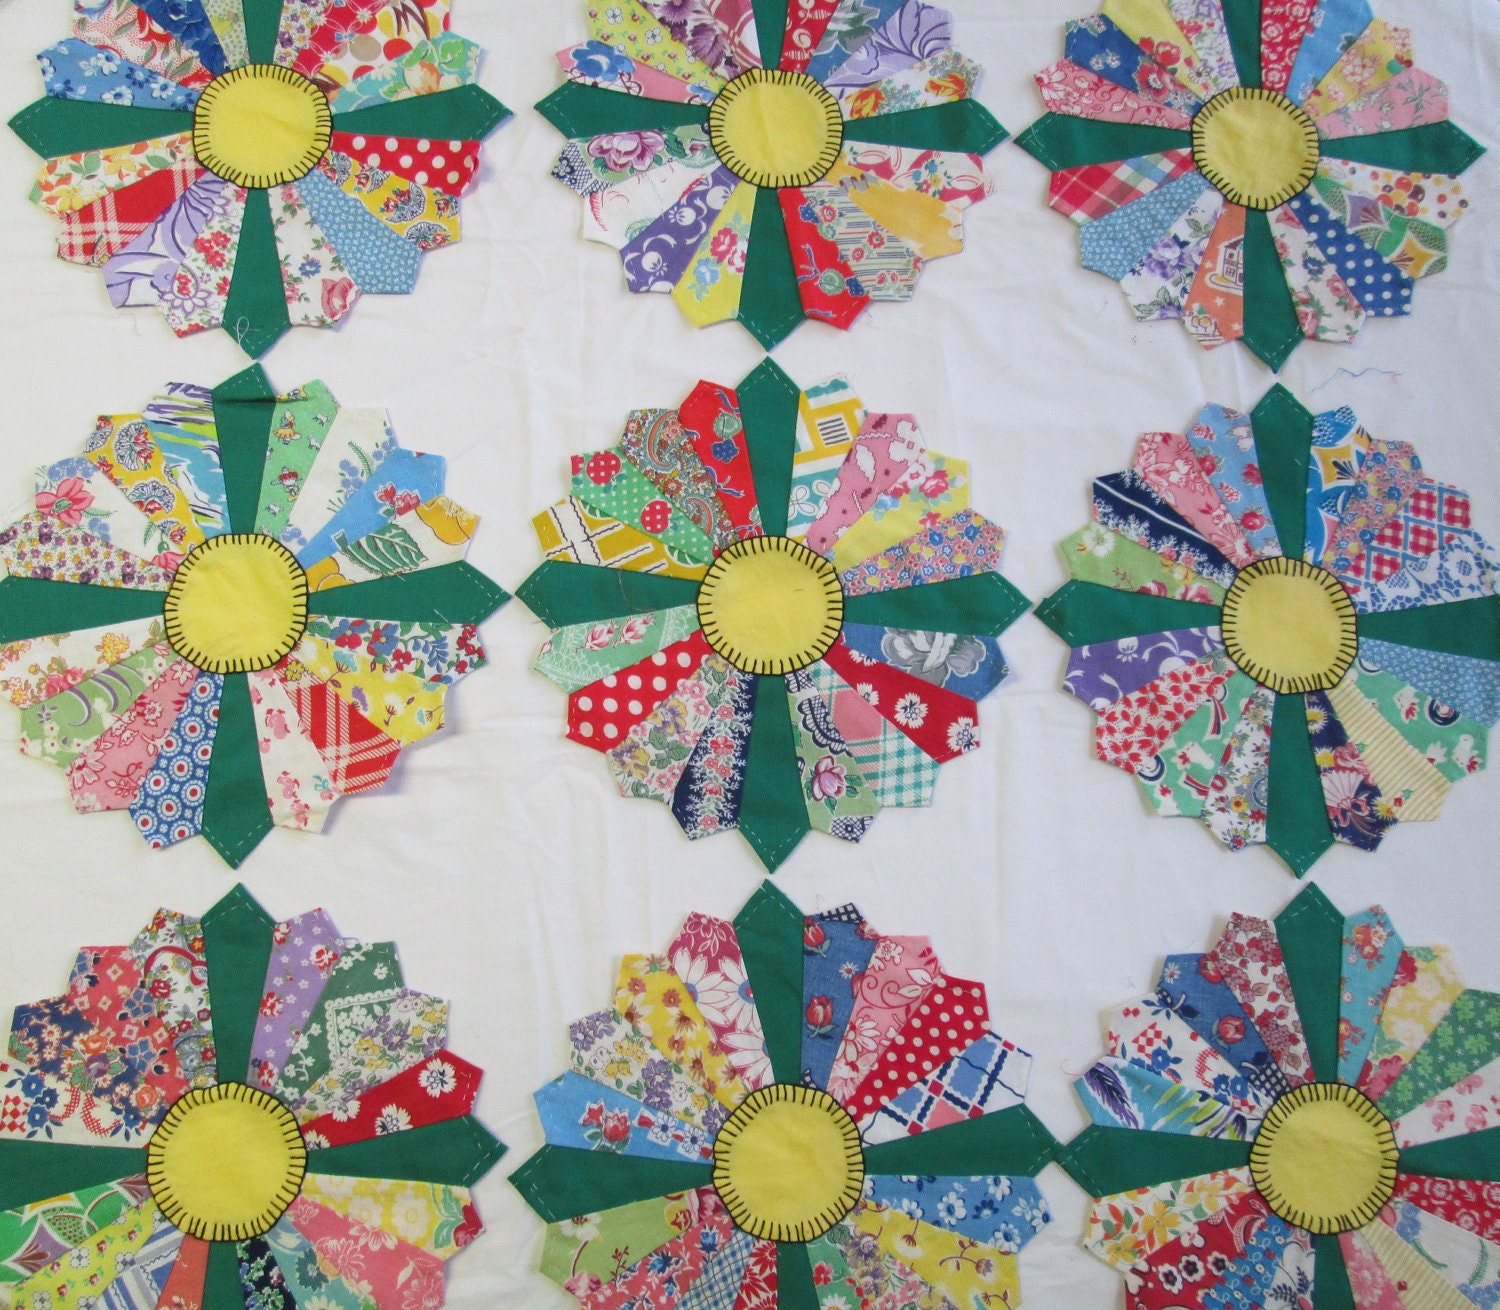 Antique Dresden Plate Quilt Top Blocks Vintage 1930s Fabric Feedsack Embroidered Pieces